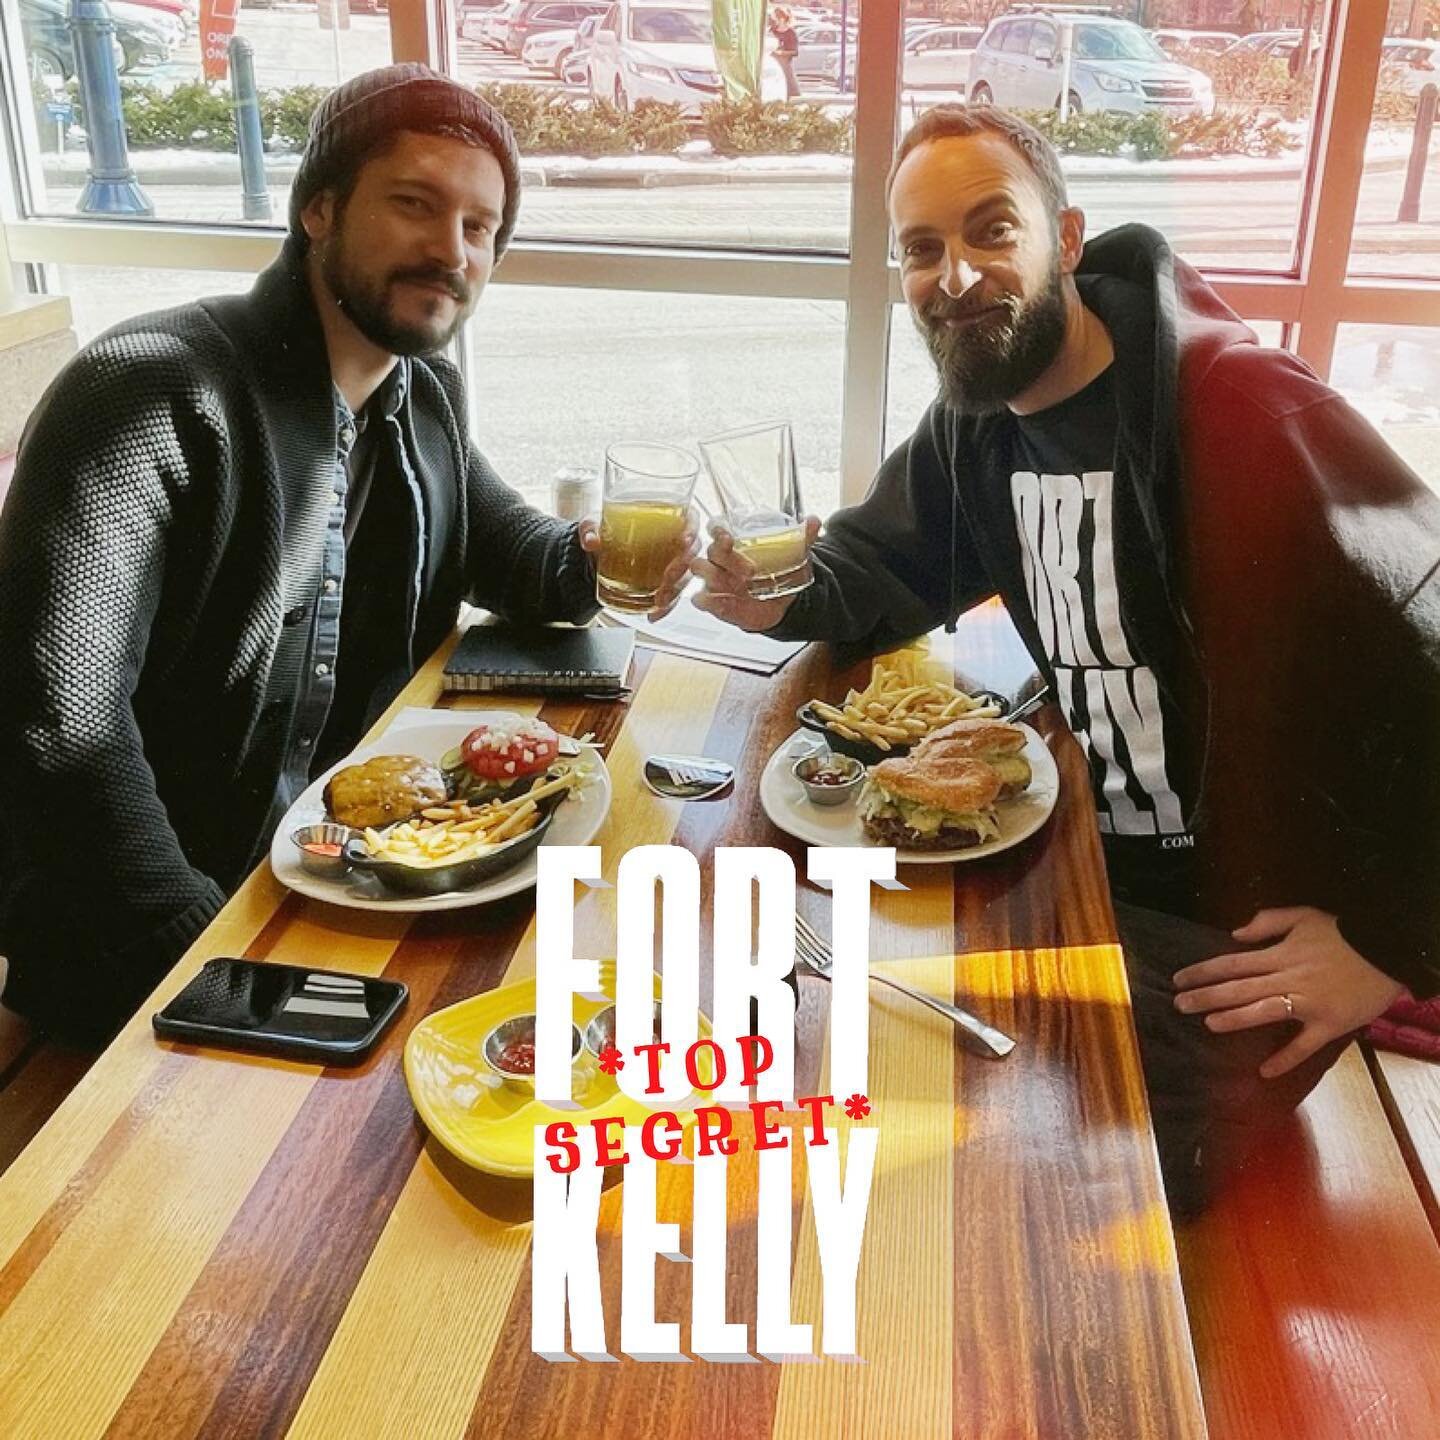 Met with @wheelhouseart today for the beginning stages of something really exciting in the pipeline for Fort Kelly. If you don&rsquo;t already follow him, get with the program!
Stay tuned. #getexcited
.
.
.

#fortkellyandco #fortkelly #buildit #tools